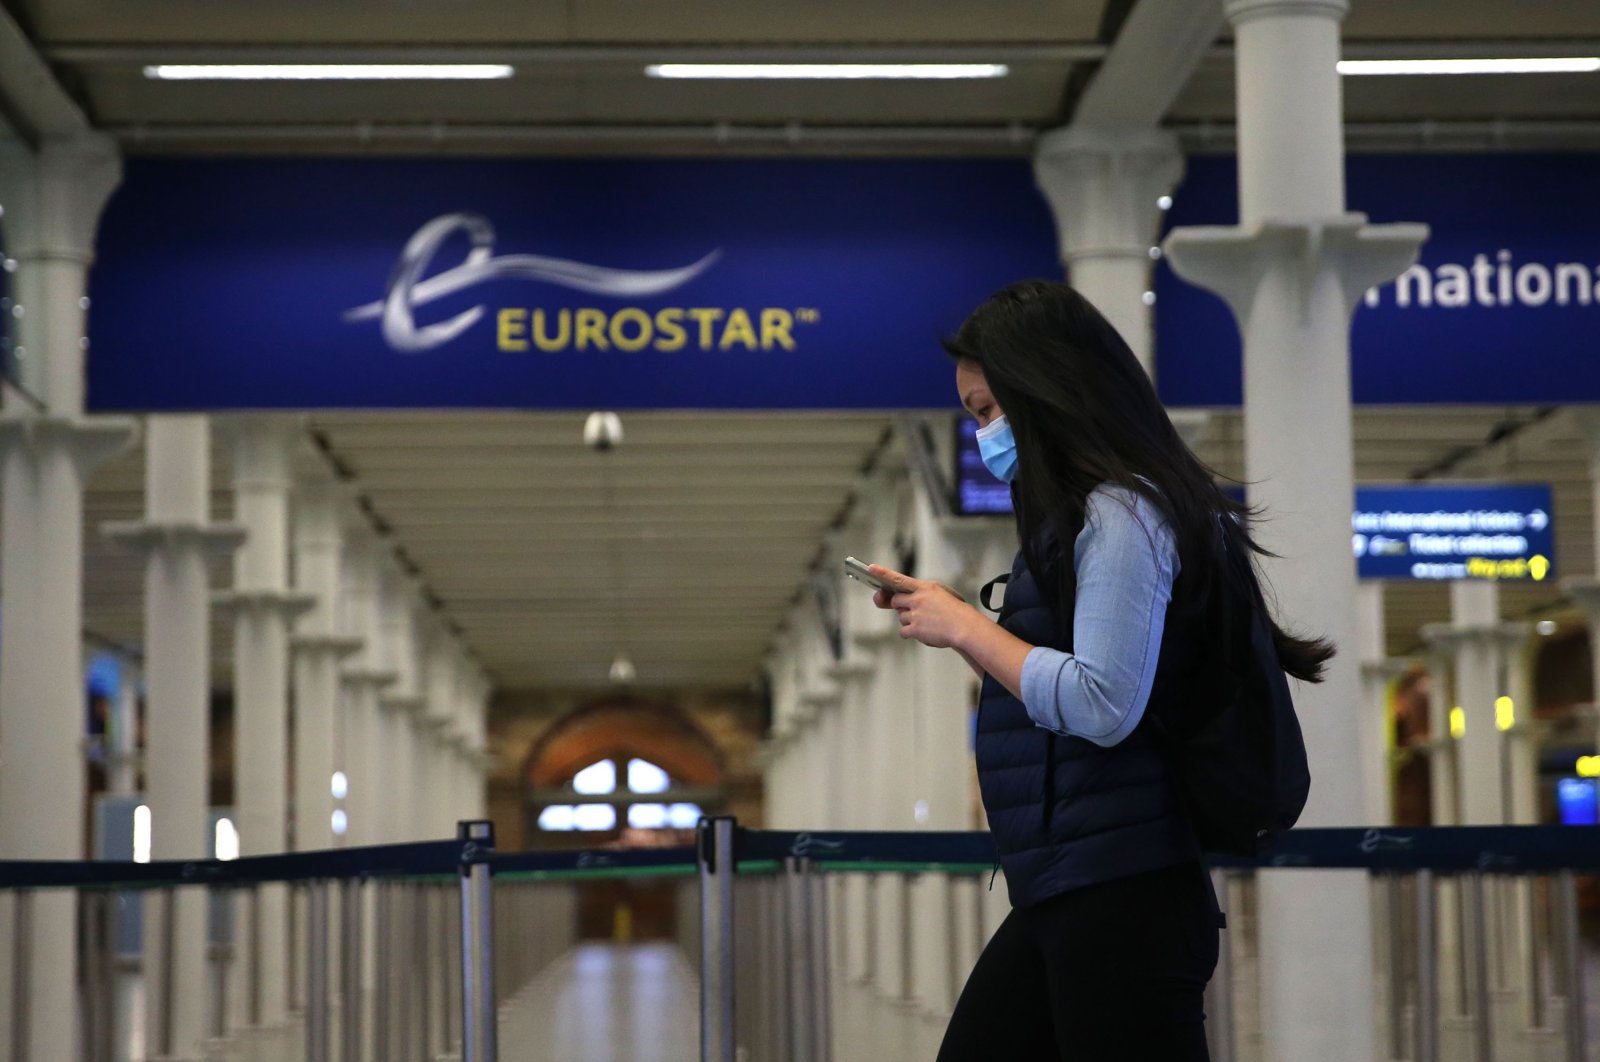 A passnger wearing a facemask arrives at the Eurostar terminal at St Pancras station in London on May 6, 2020 as life continues under a nationwide lockdown imposed to slow the spread of the novel coronavirus. (AFP Photo)